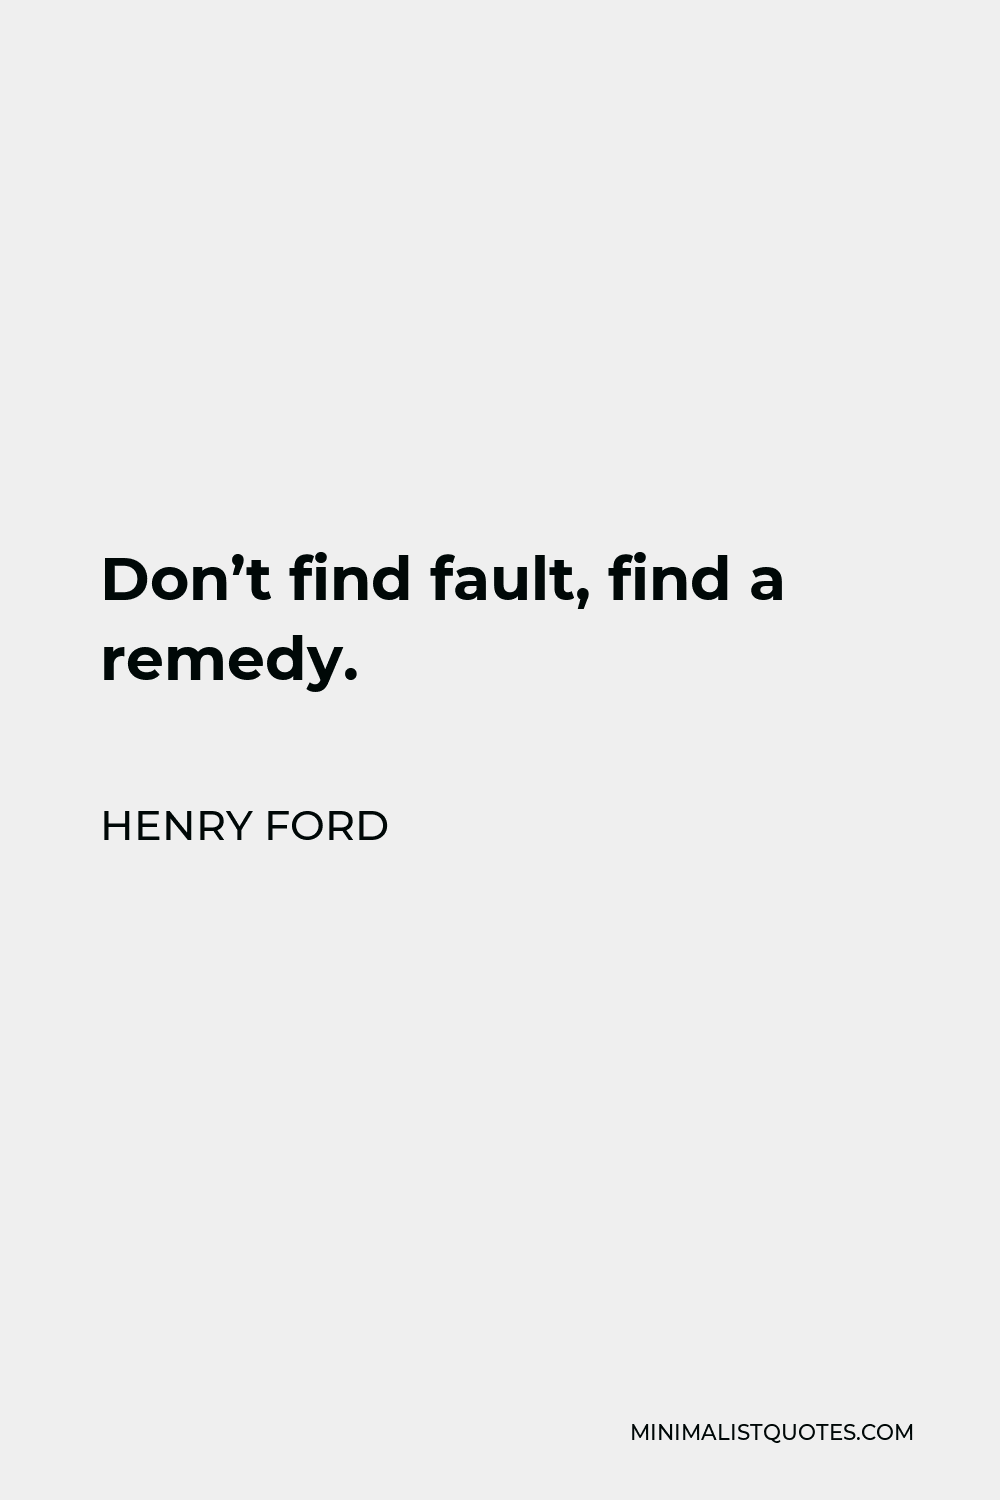 Henry Ford Quote - Don’t find fault, find a remedy.